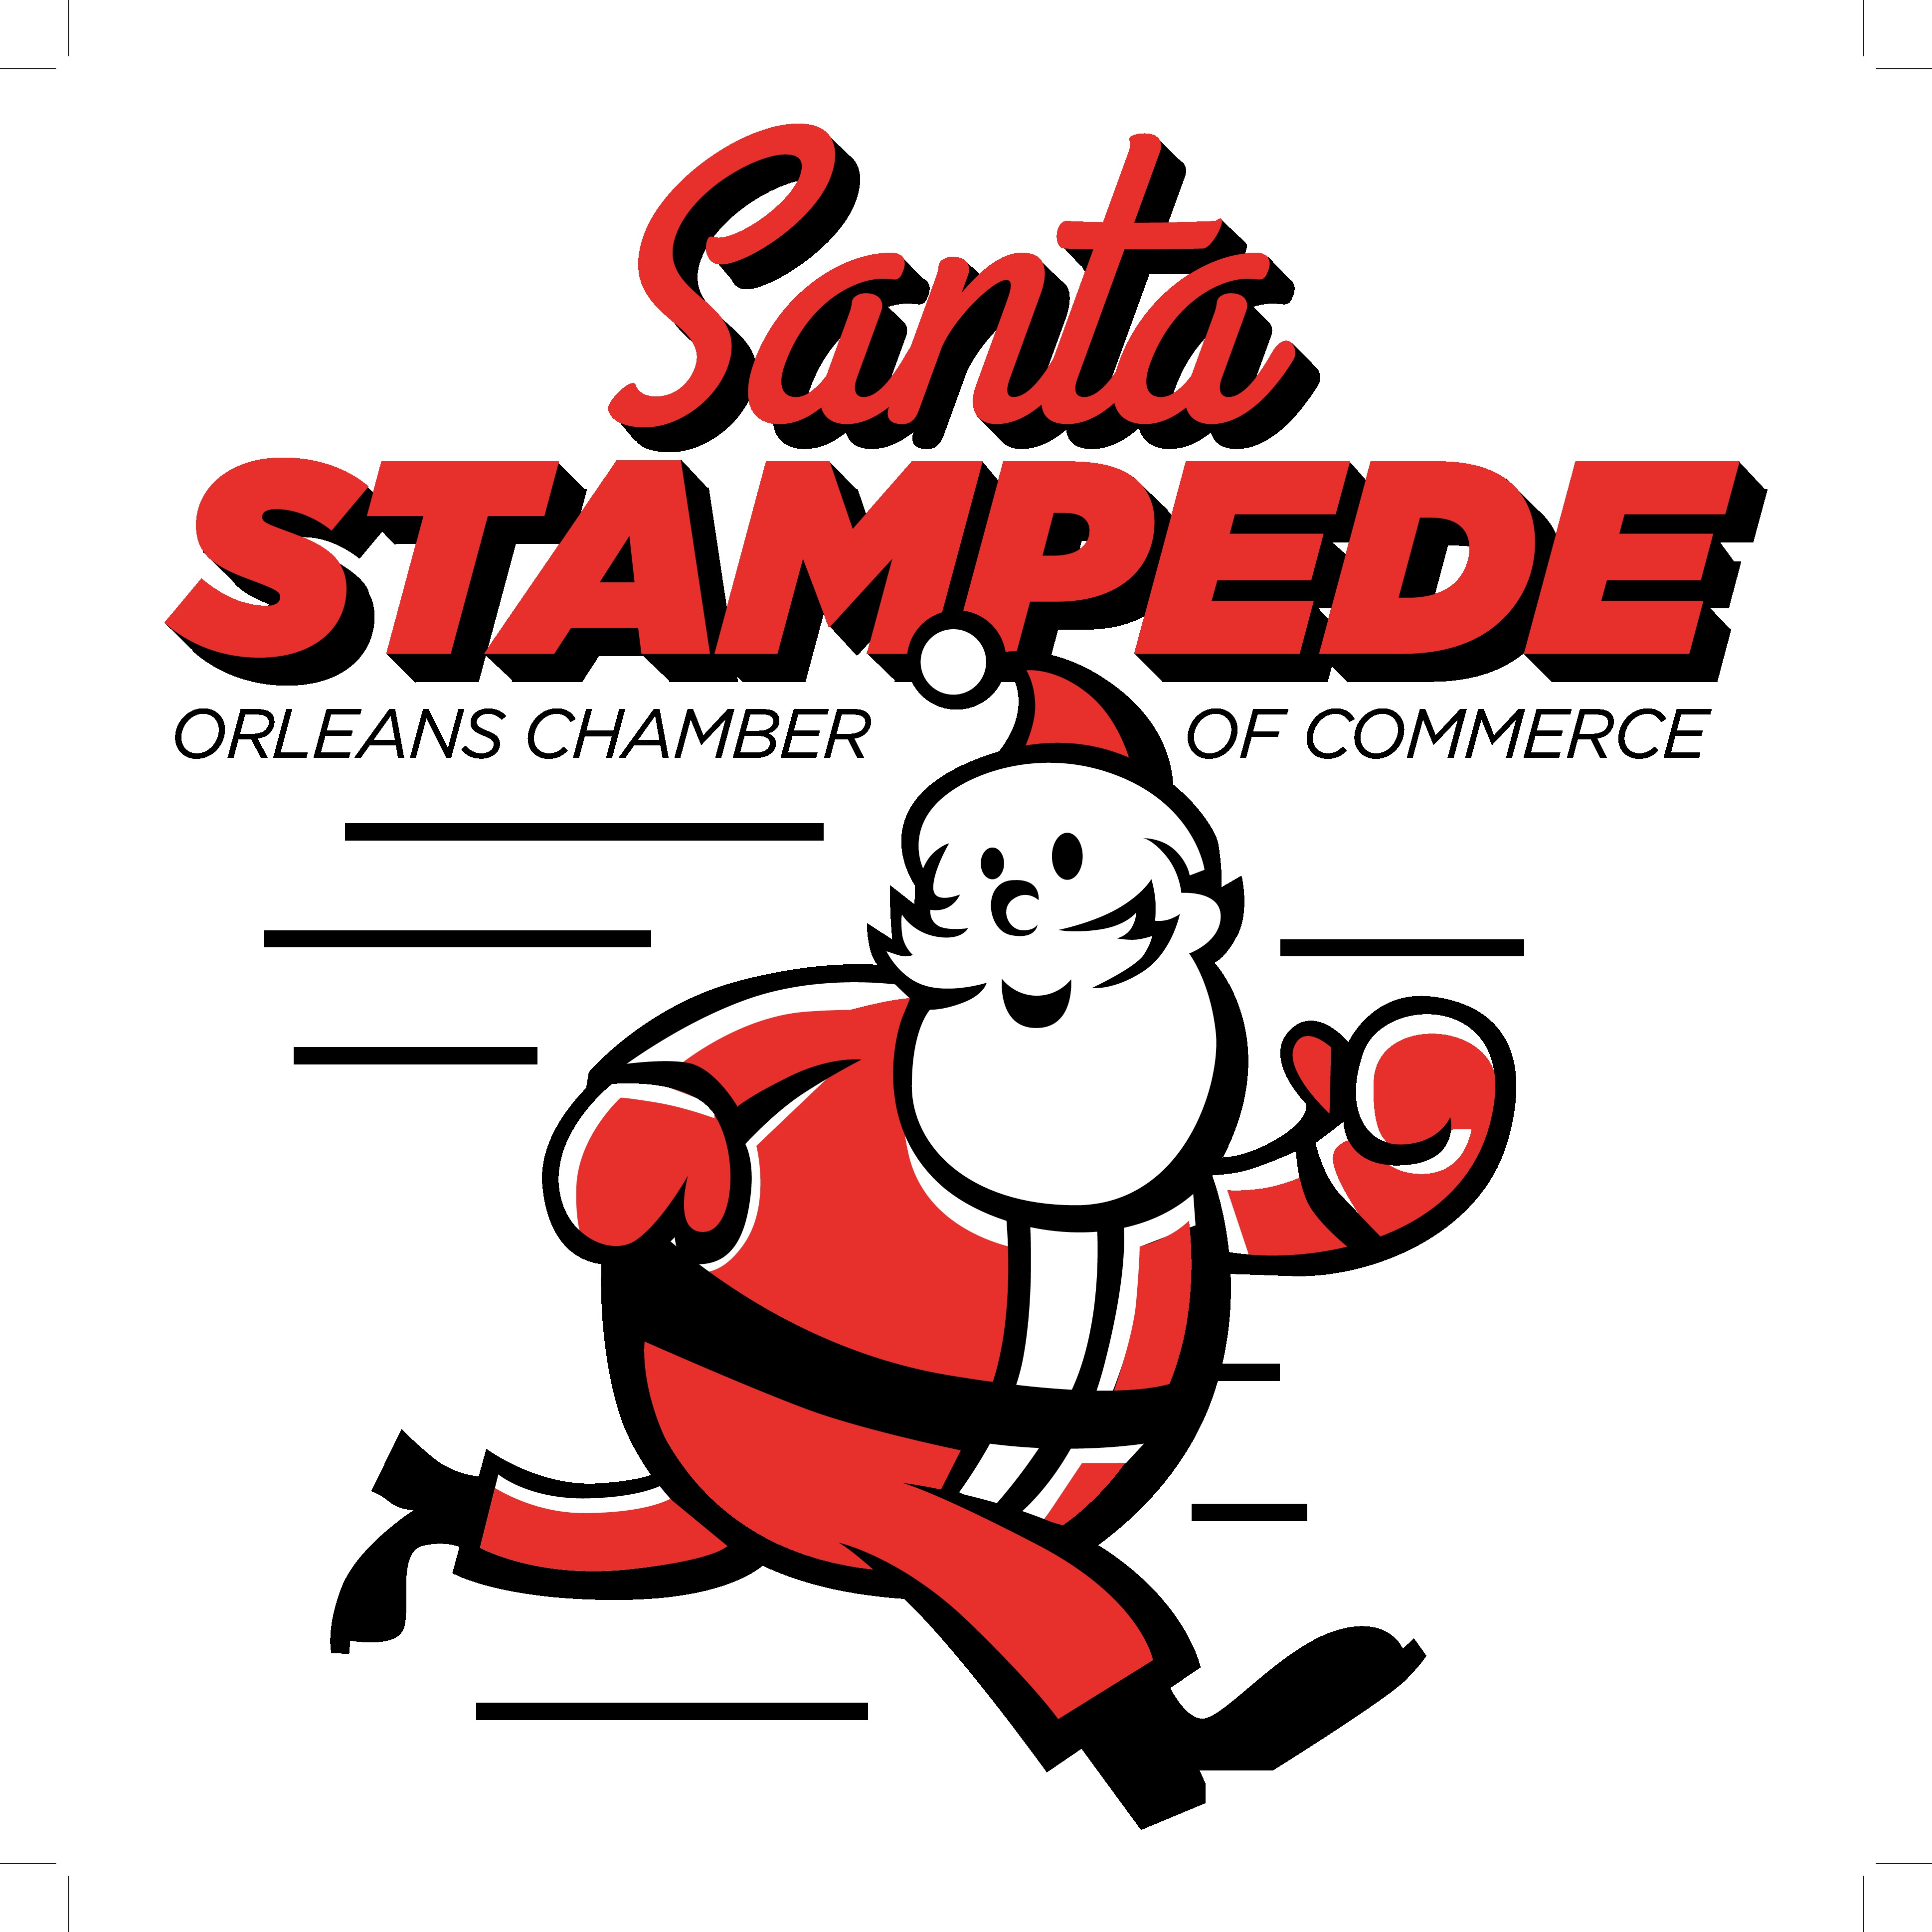 Orleans Chamber Of Commerce Hosts Santa Stampede 5k And Family Fun Run